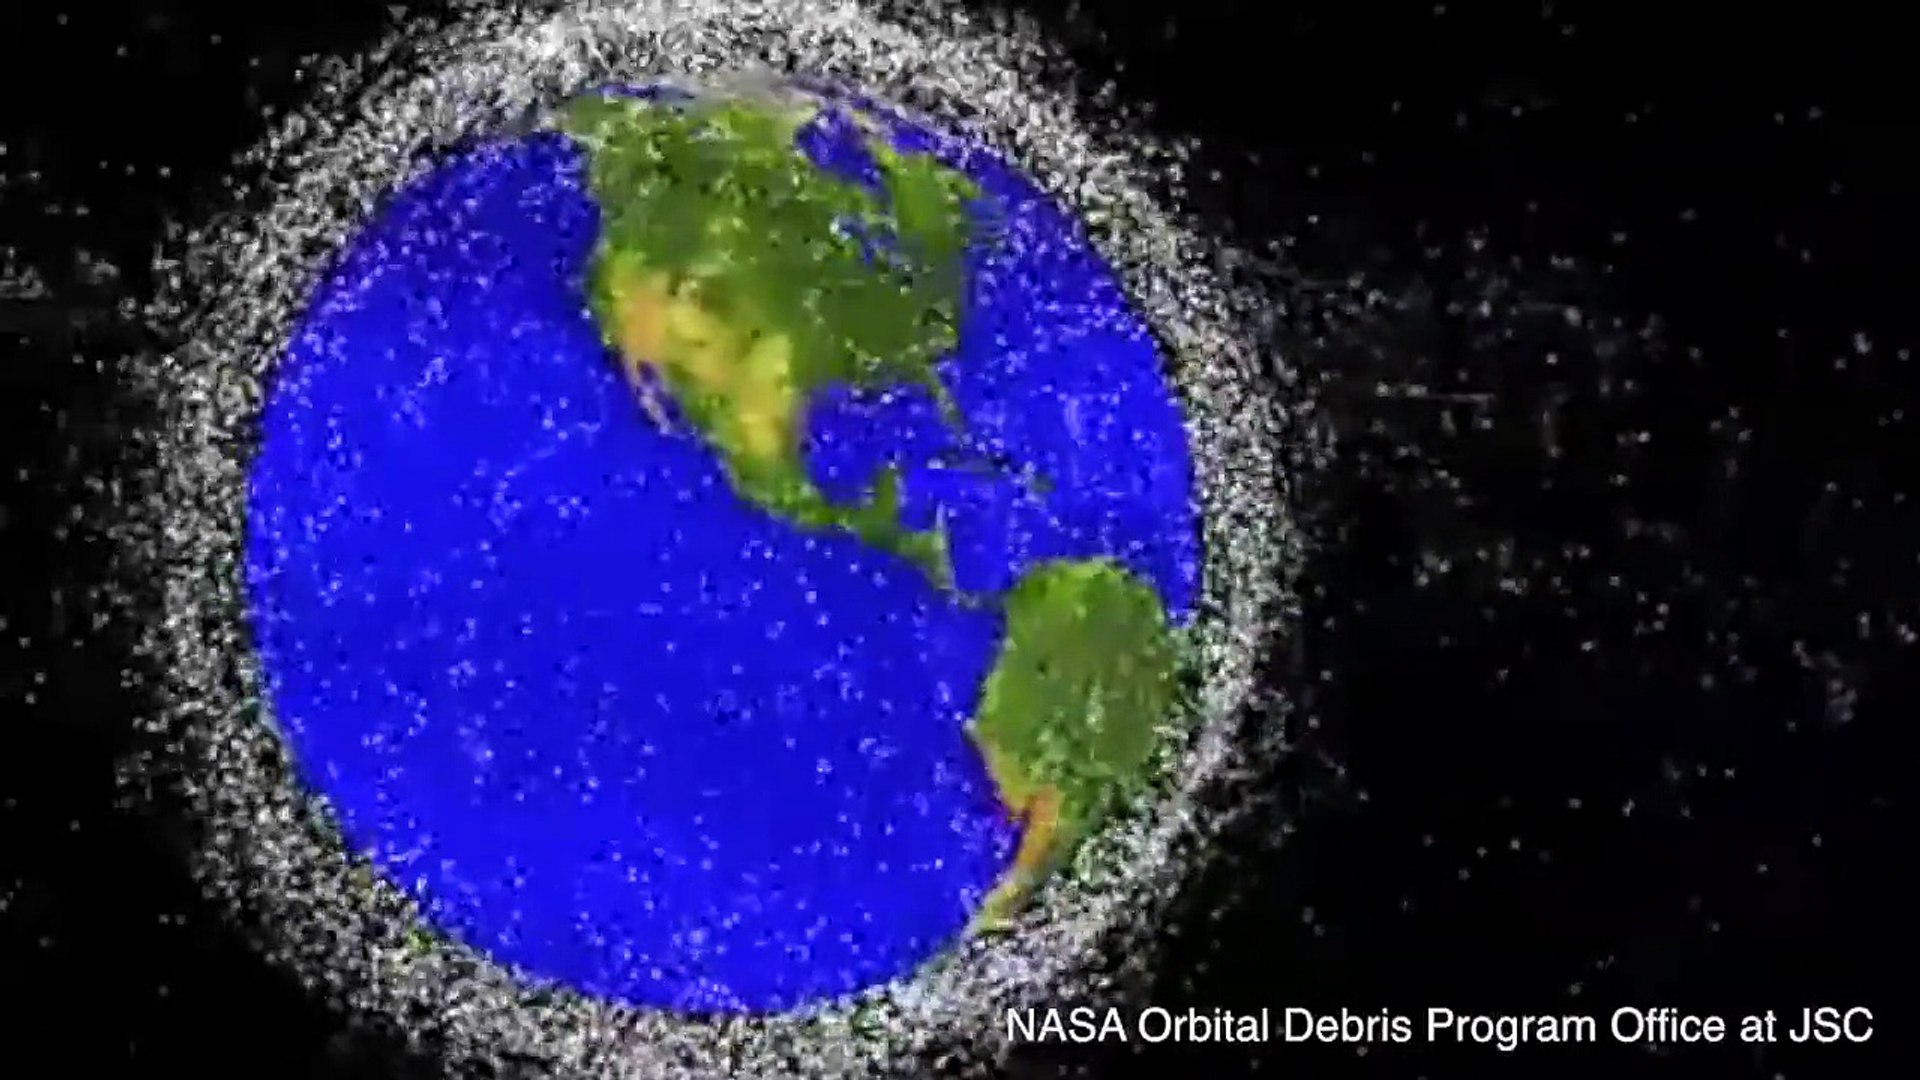 NASA's Animation Shows Massive Space Junk Around Earth - video Dailymotion